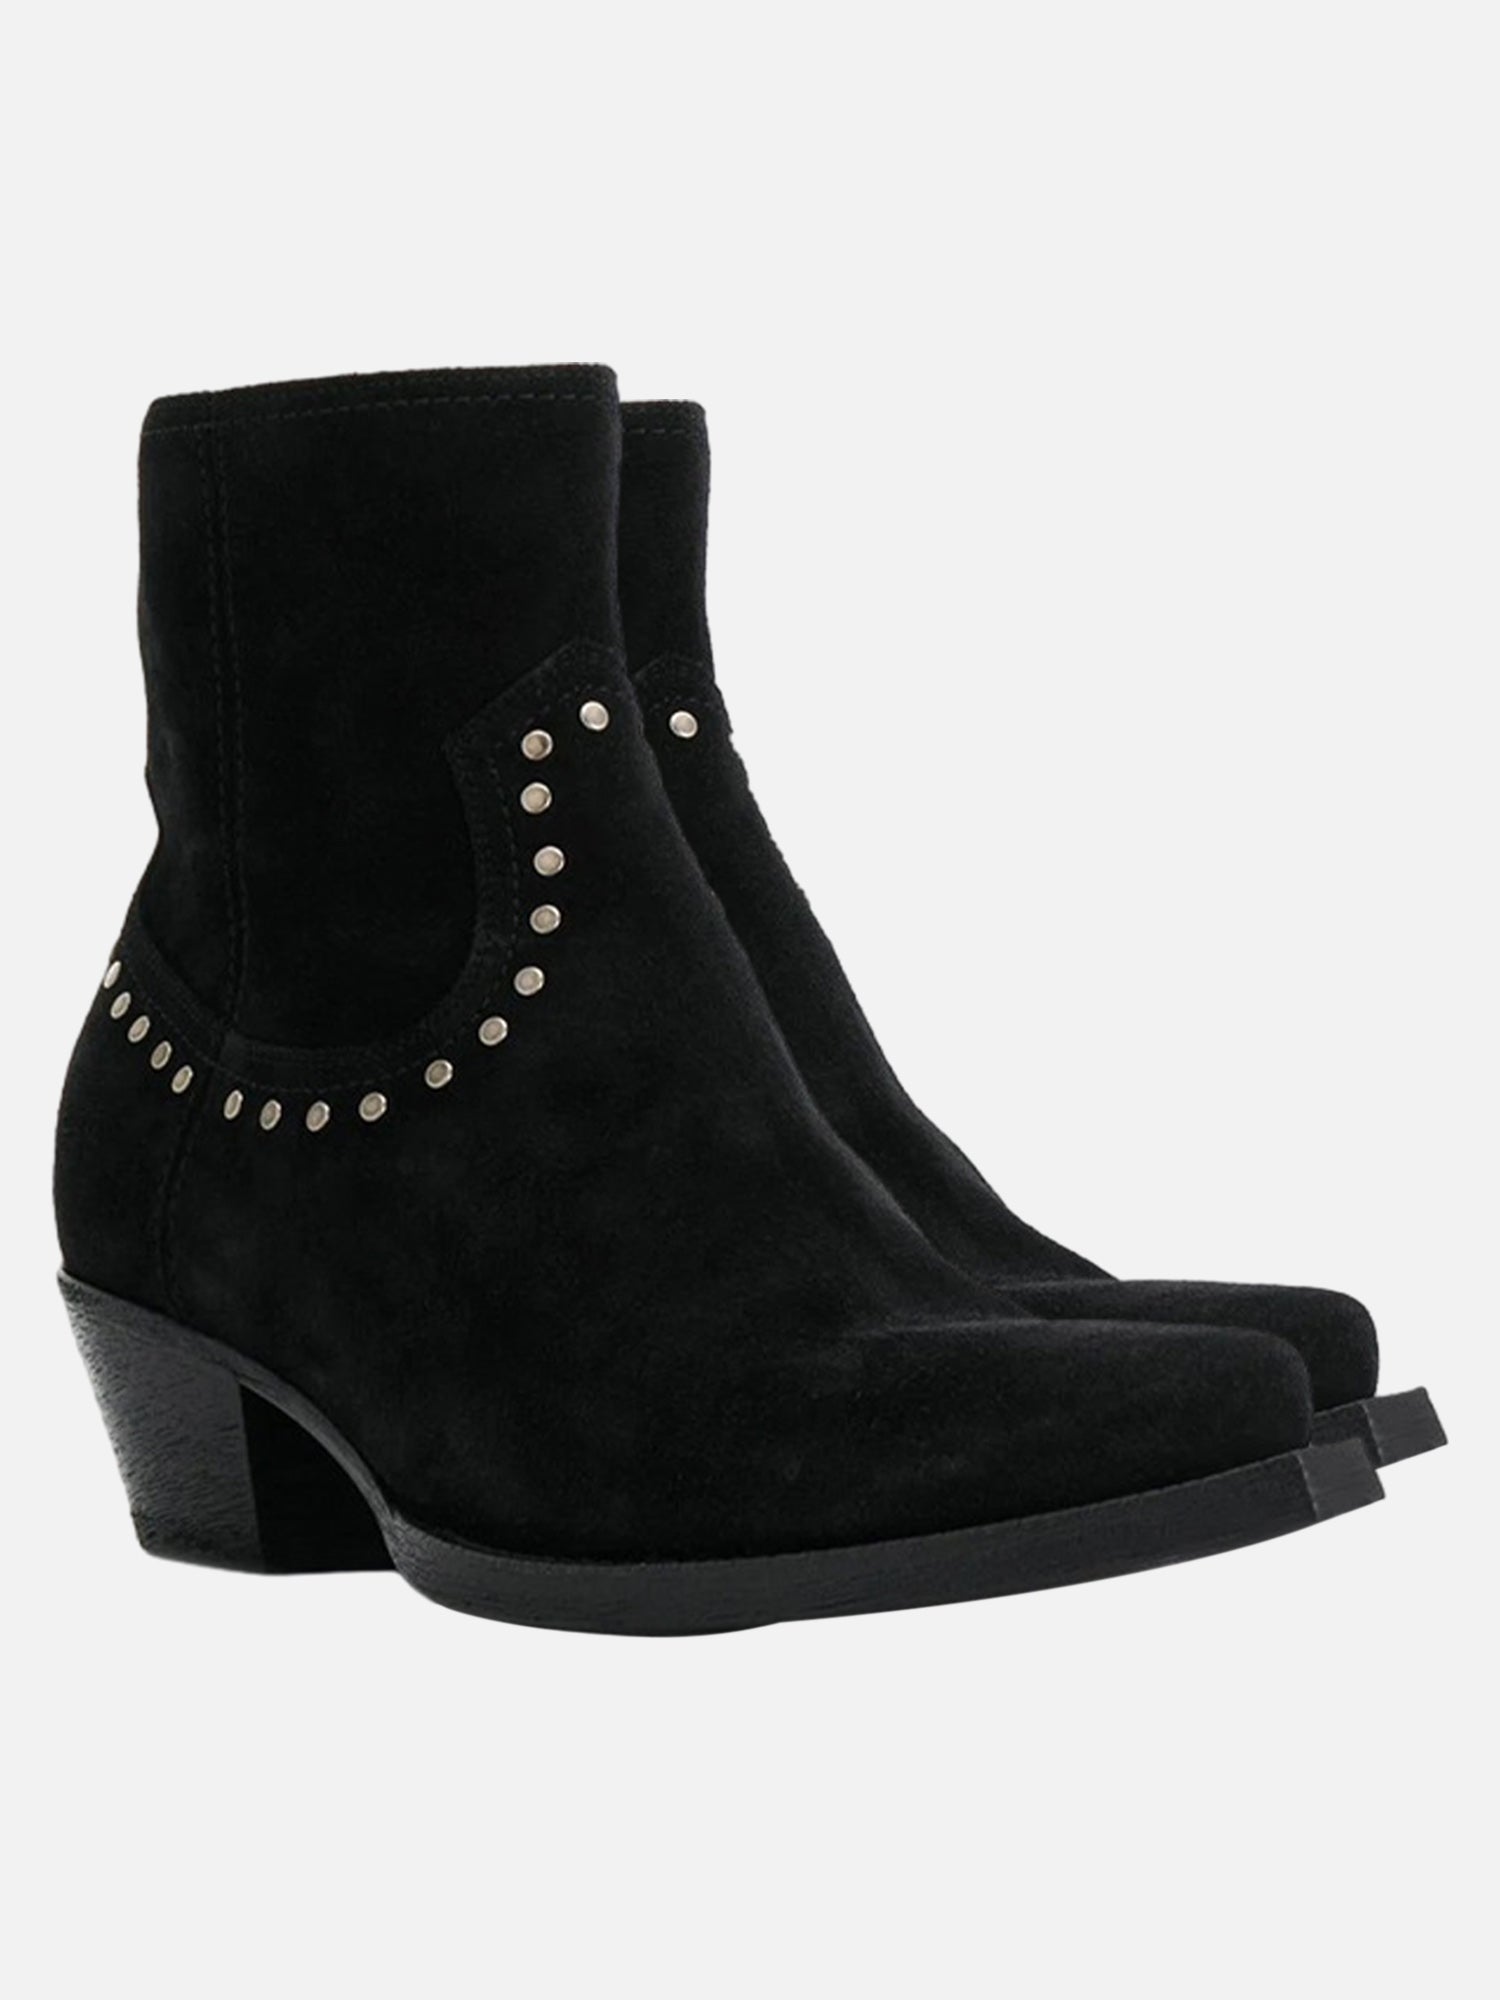 Stylish Pointed Toe Side Zipper Rivet Frosted Chelsea Boots